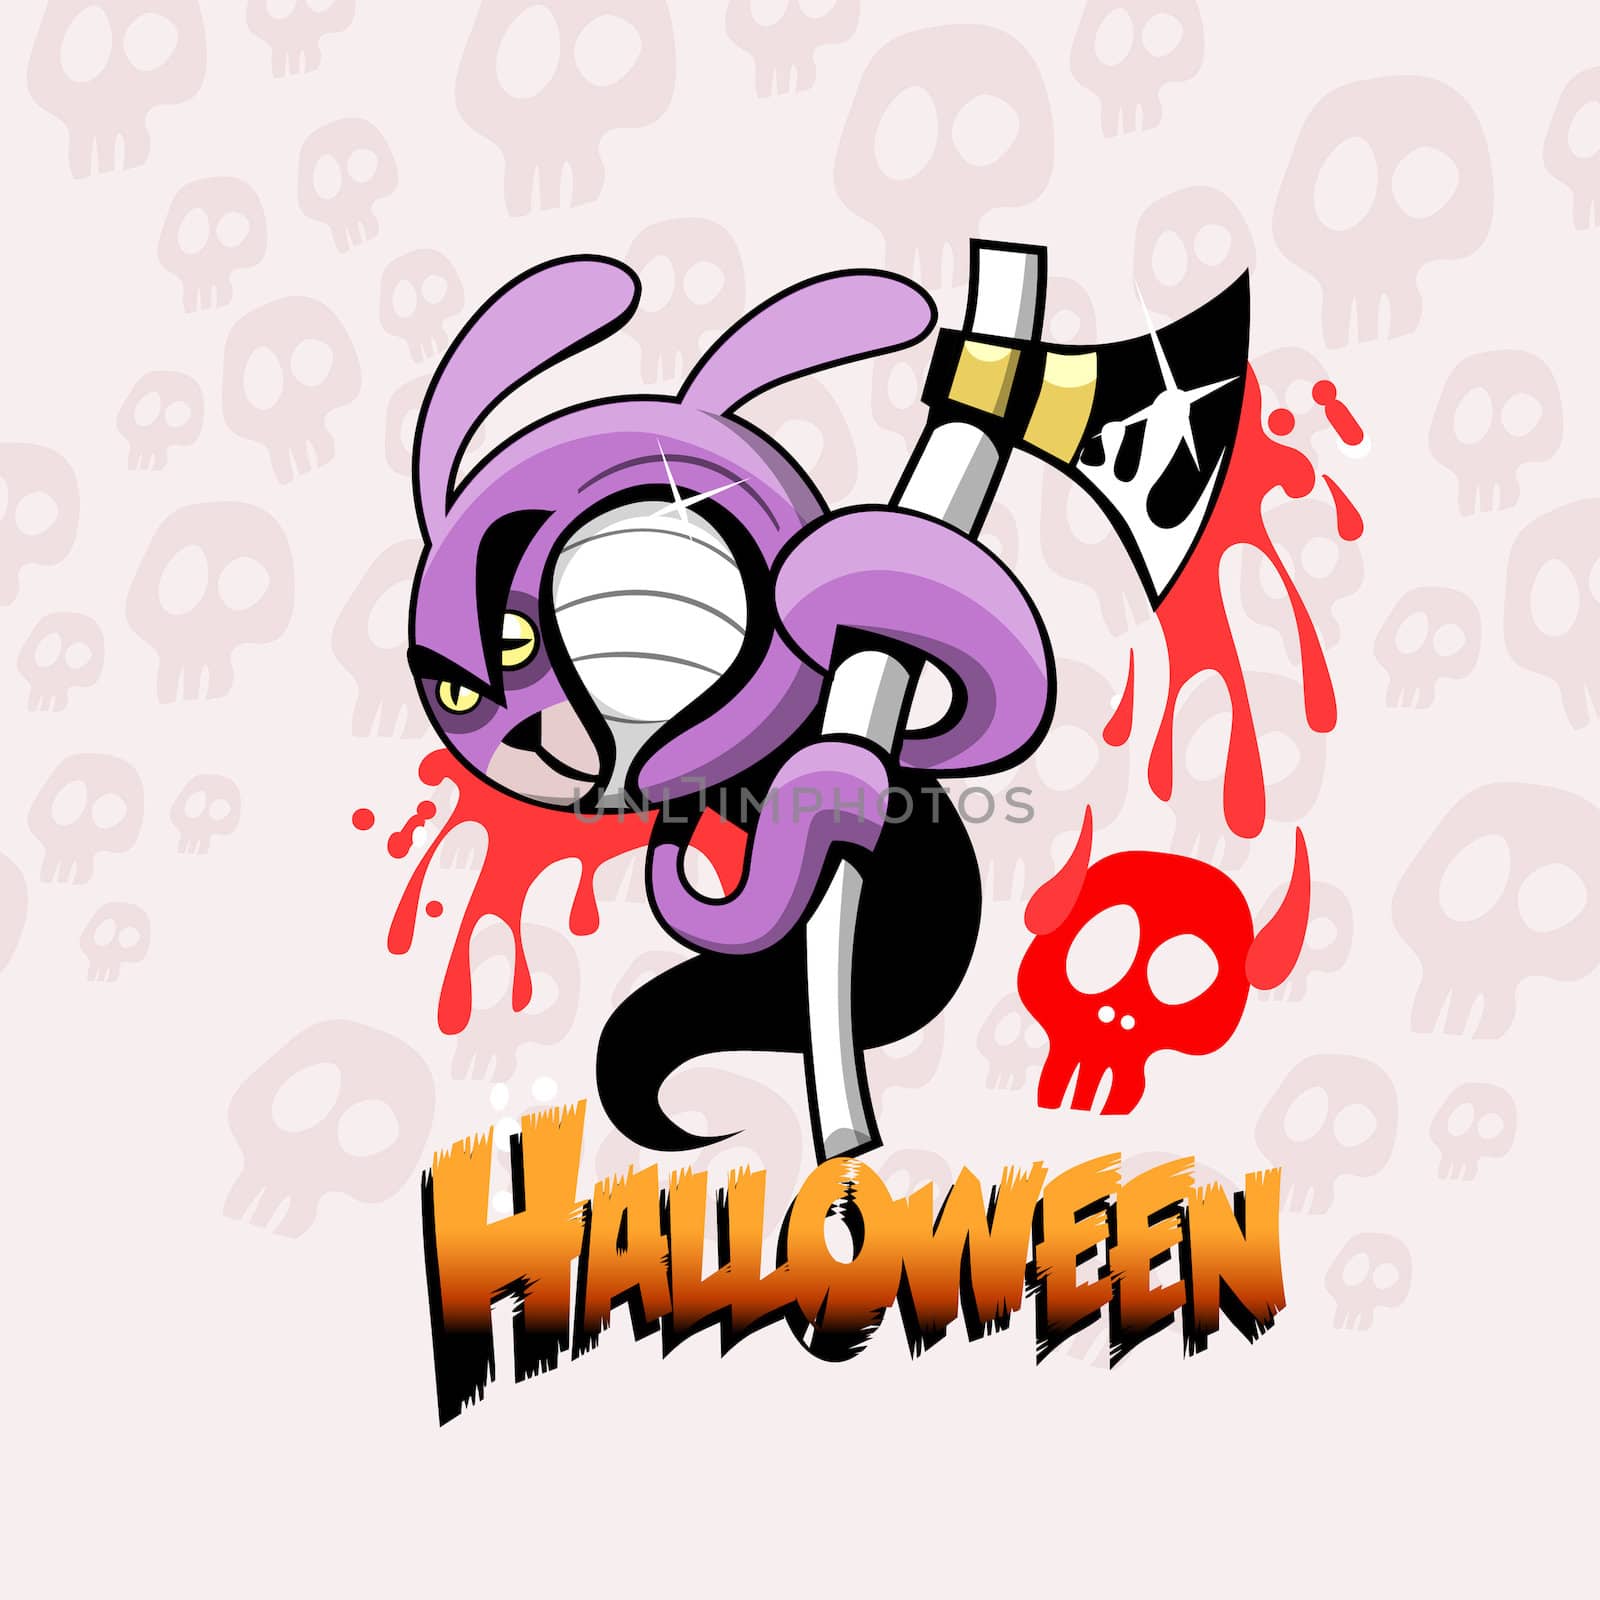 illustration with text halloween, rabbit with axe with blood and skulls